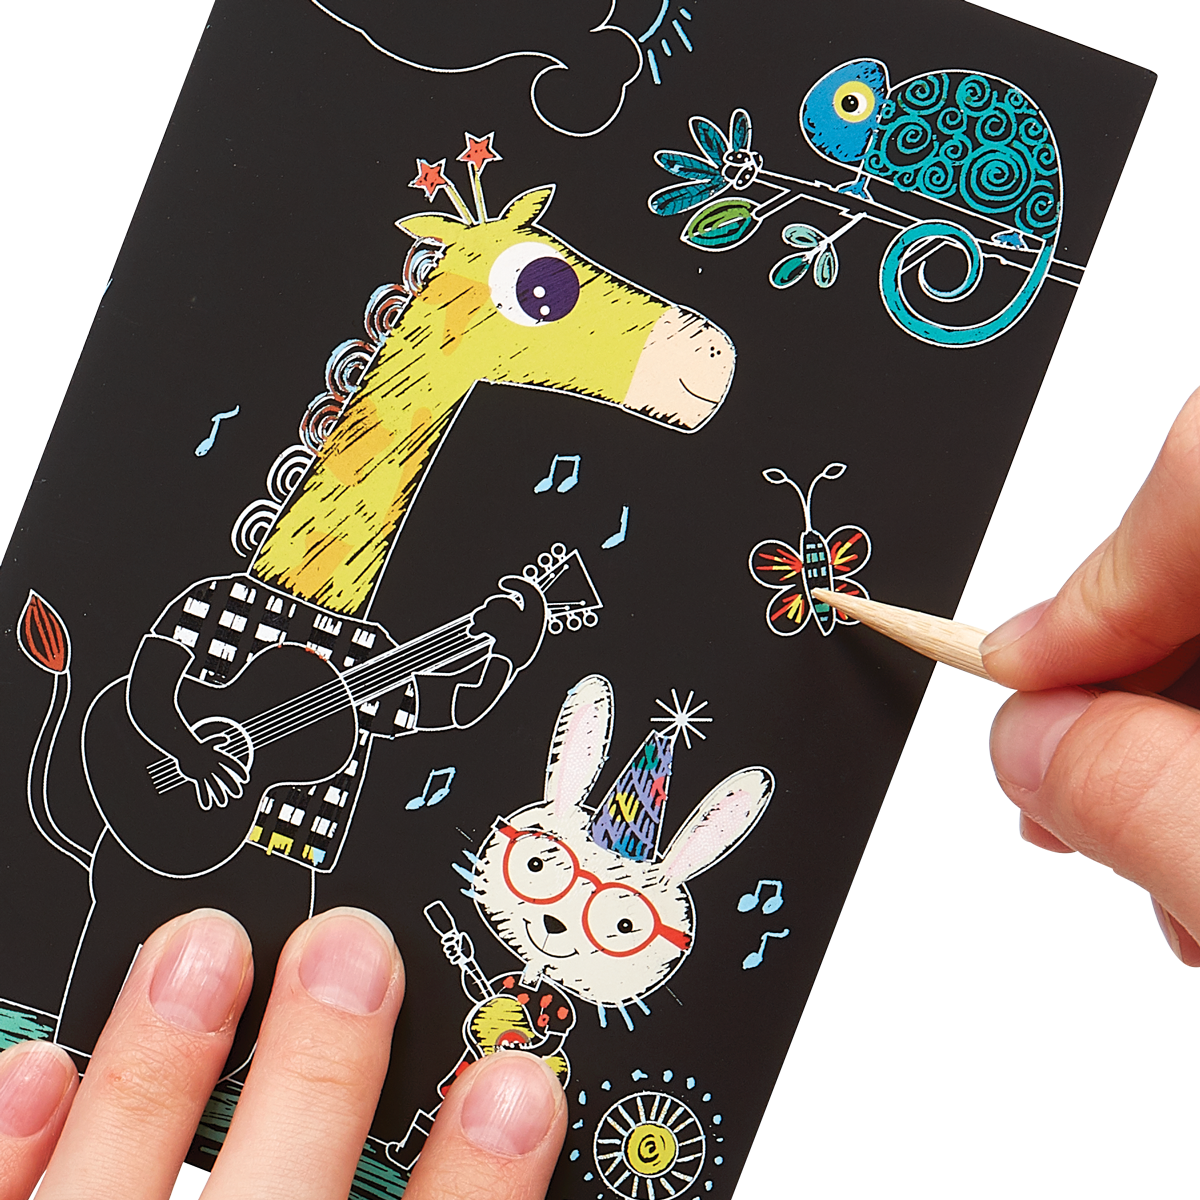 Display artwork of the Safari Party Scratch and Scribble Mini Scratch Art Kit